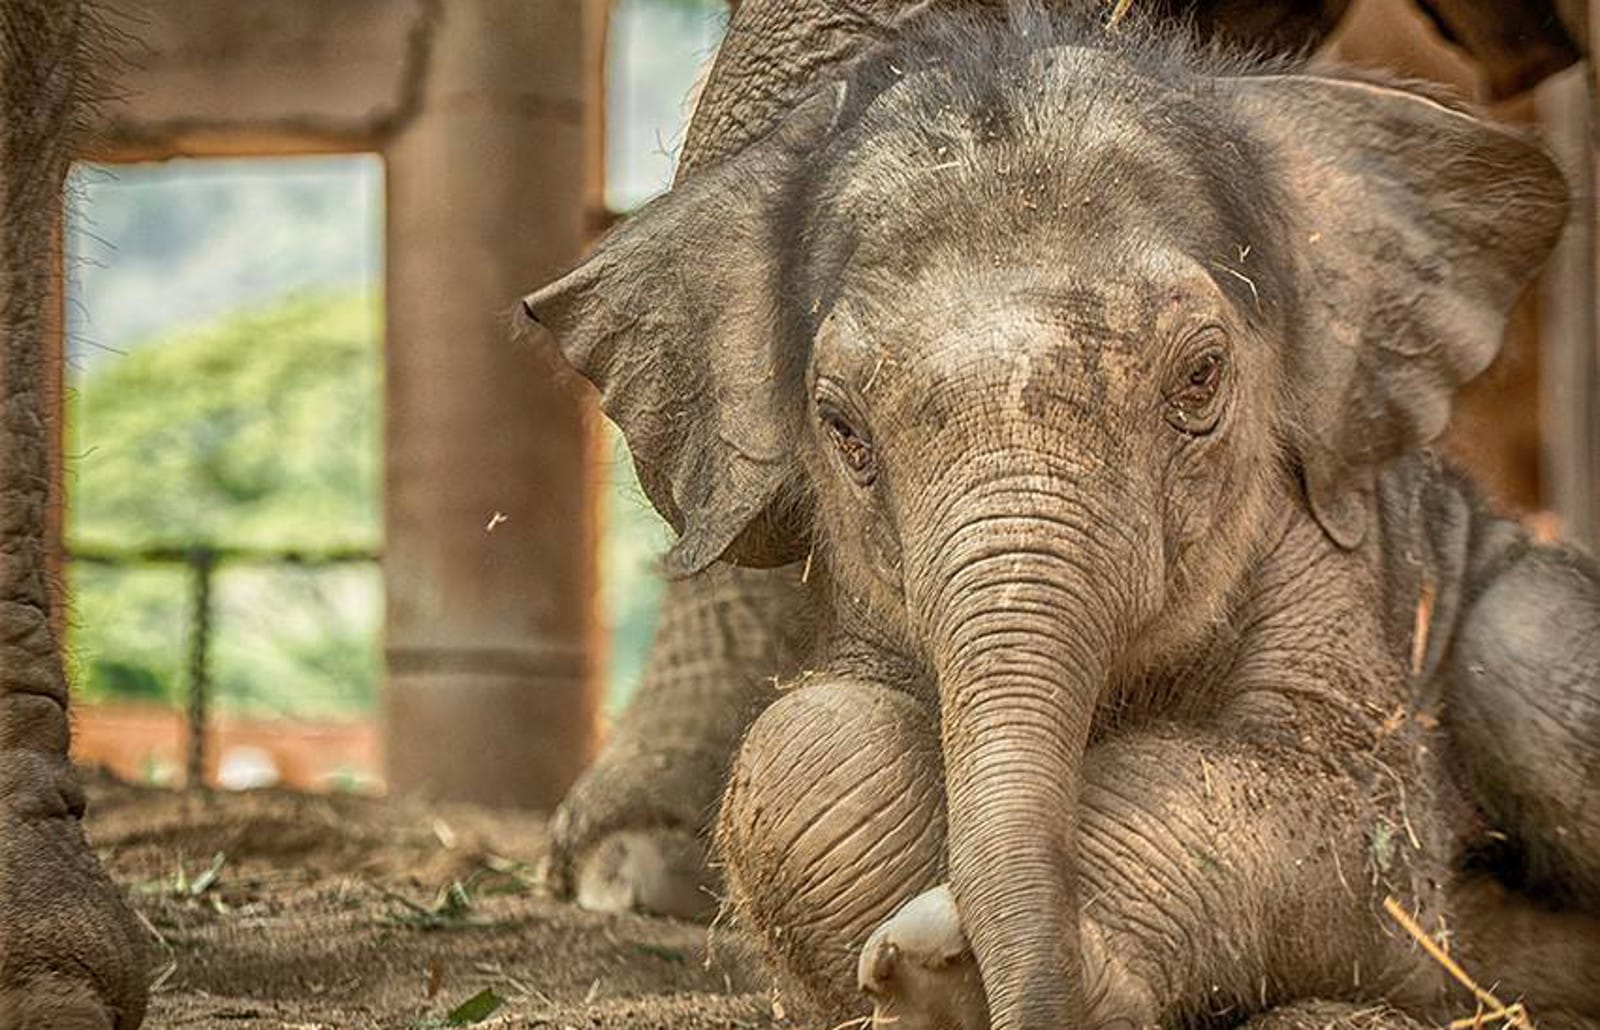 This Baby Elephant Will Never Know What it's Like to be Exploited – How We Can Make This True for All Elephants